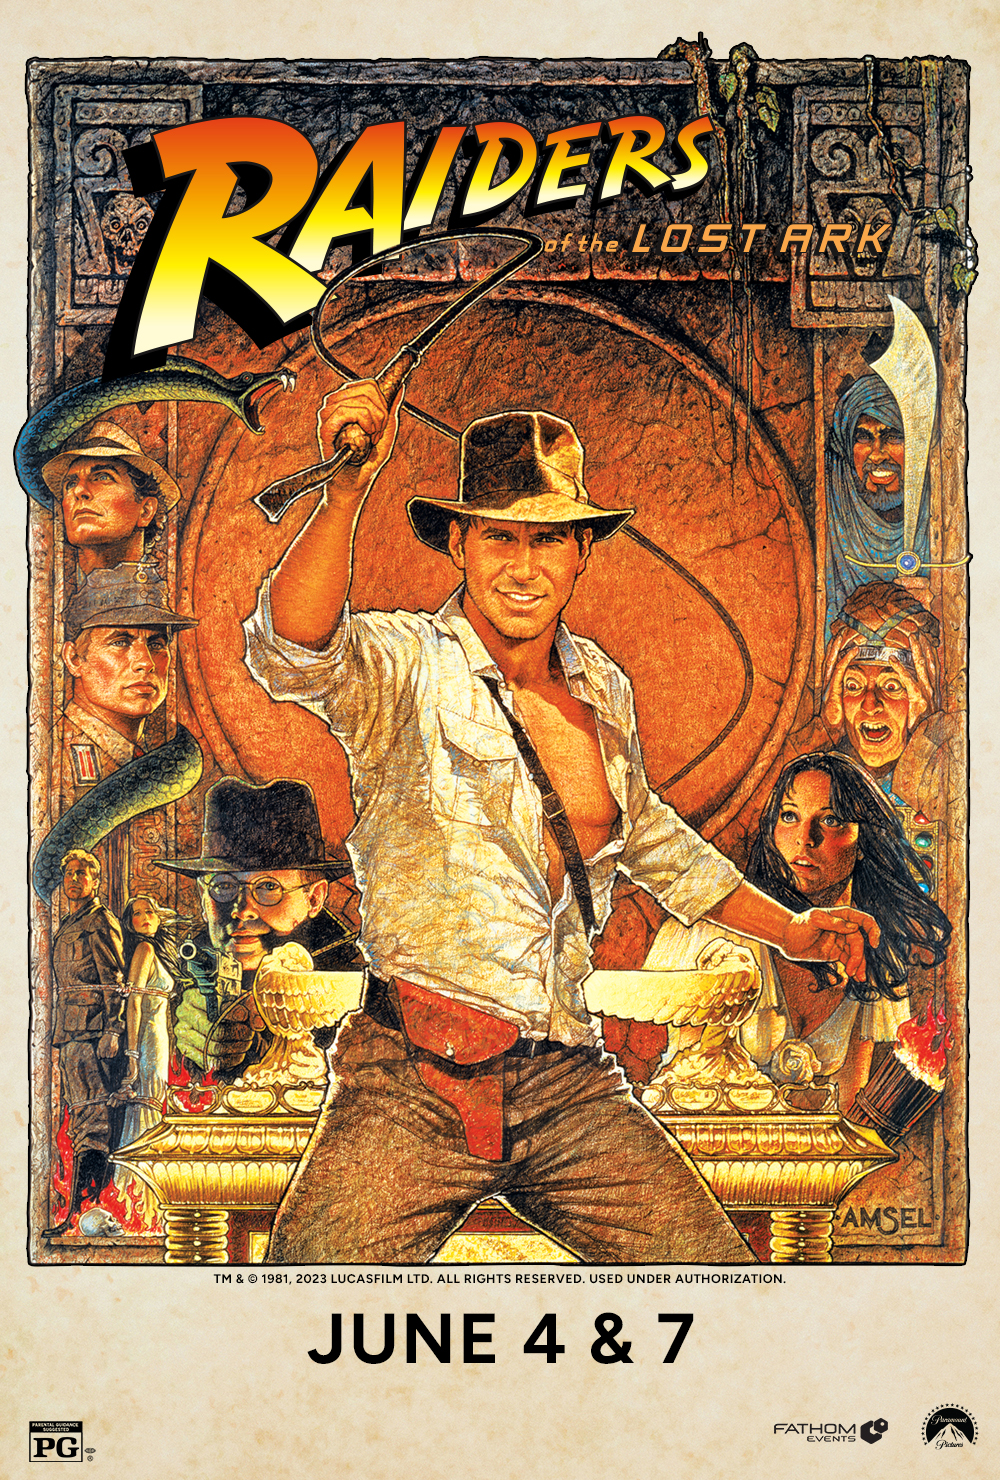 Raiders of the Lost Ark (2023 Re-Release) at an AMC Theatre near you.